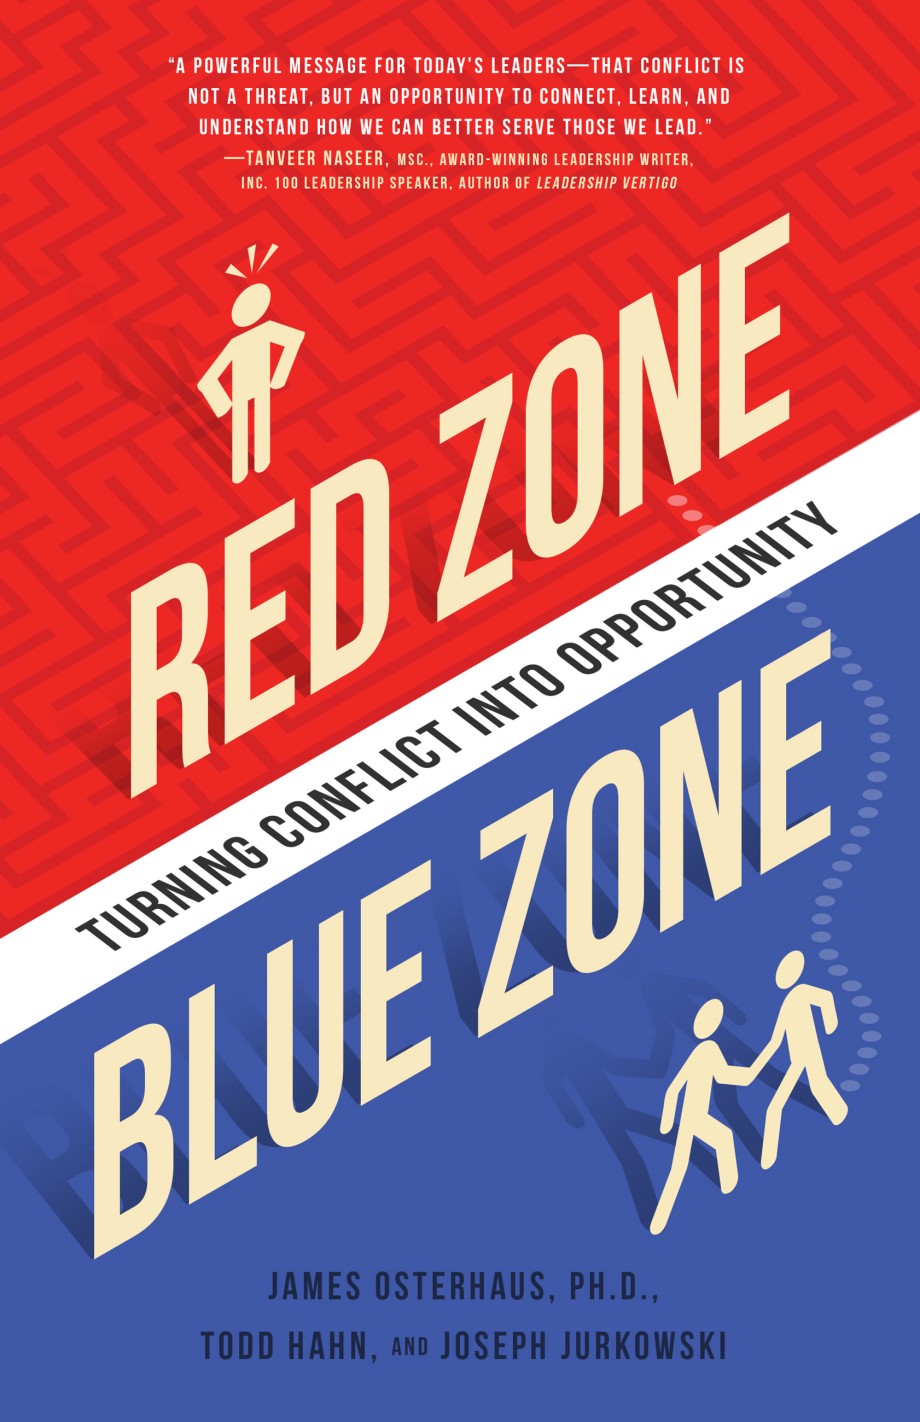 Red Zone, Blue Zone Turning Conflict into Opportunity